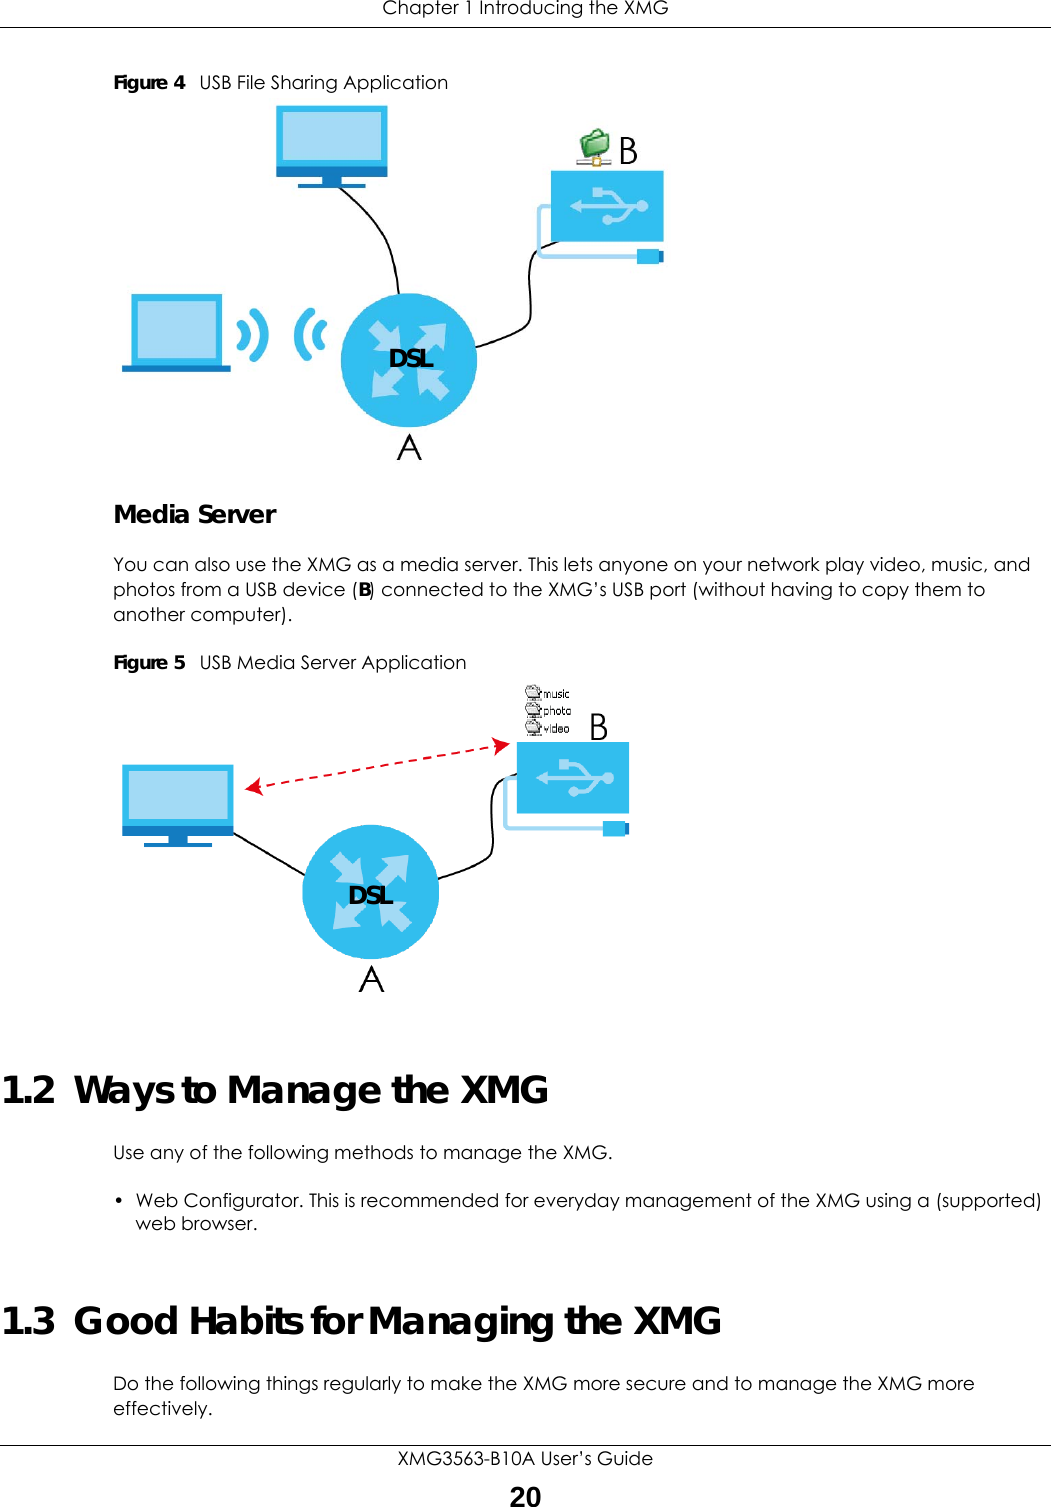 Chapter 1 Introducing the XMGXMG3563-B10A User’s Guide20Figure 4   USB File Sharing Application Media ServerYou can also use the XMG as a media server. This lets anyone on your network play video, music, and photos from a USB device (B) connected to the XMG’s USB port (without having to copy them to another computer). Figure 5   USB Media Server Application 1.2  Ways to Manage the XMGUse any of the following methods to manage the XMG.• Web Configurator. This is recommended for everyday management of the XMG using a (supported) web browser.1.3  Good Habits for Managing the XMGDo the following things regularly to make the XMG more secure and to manage the XMG more effectively. DSLDSL